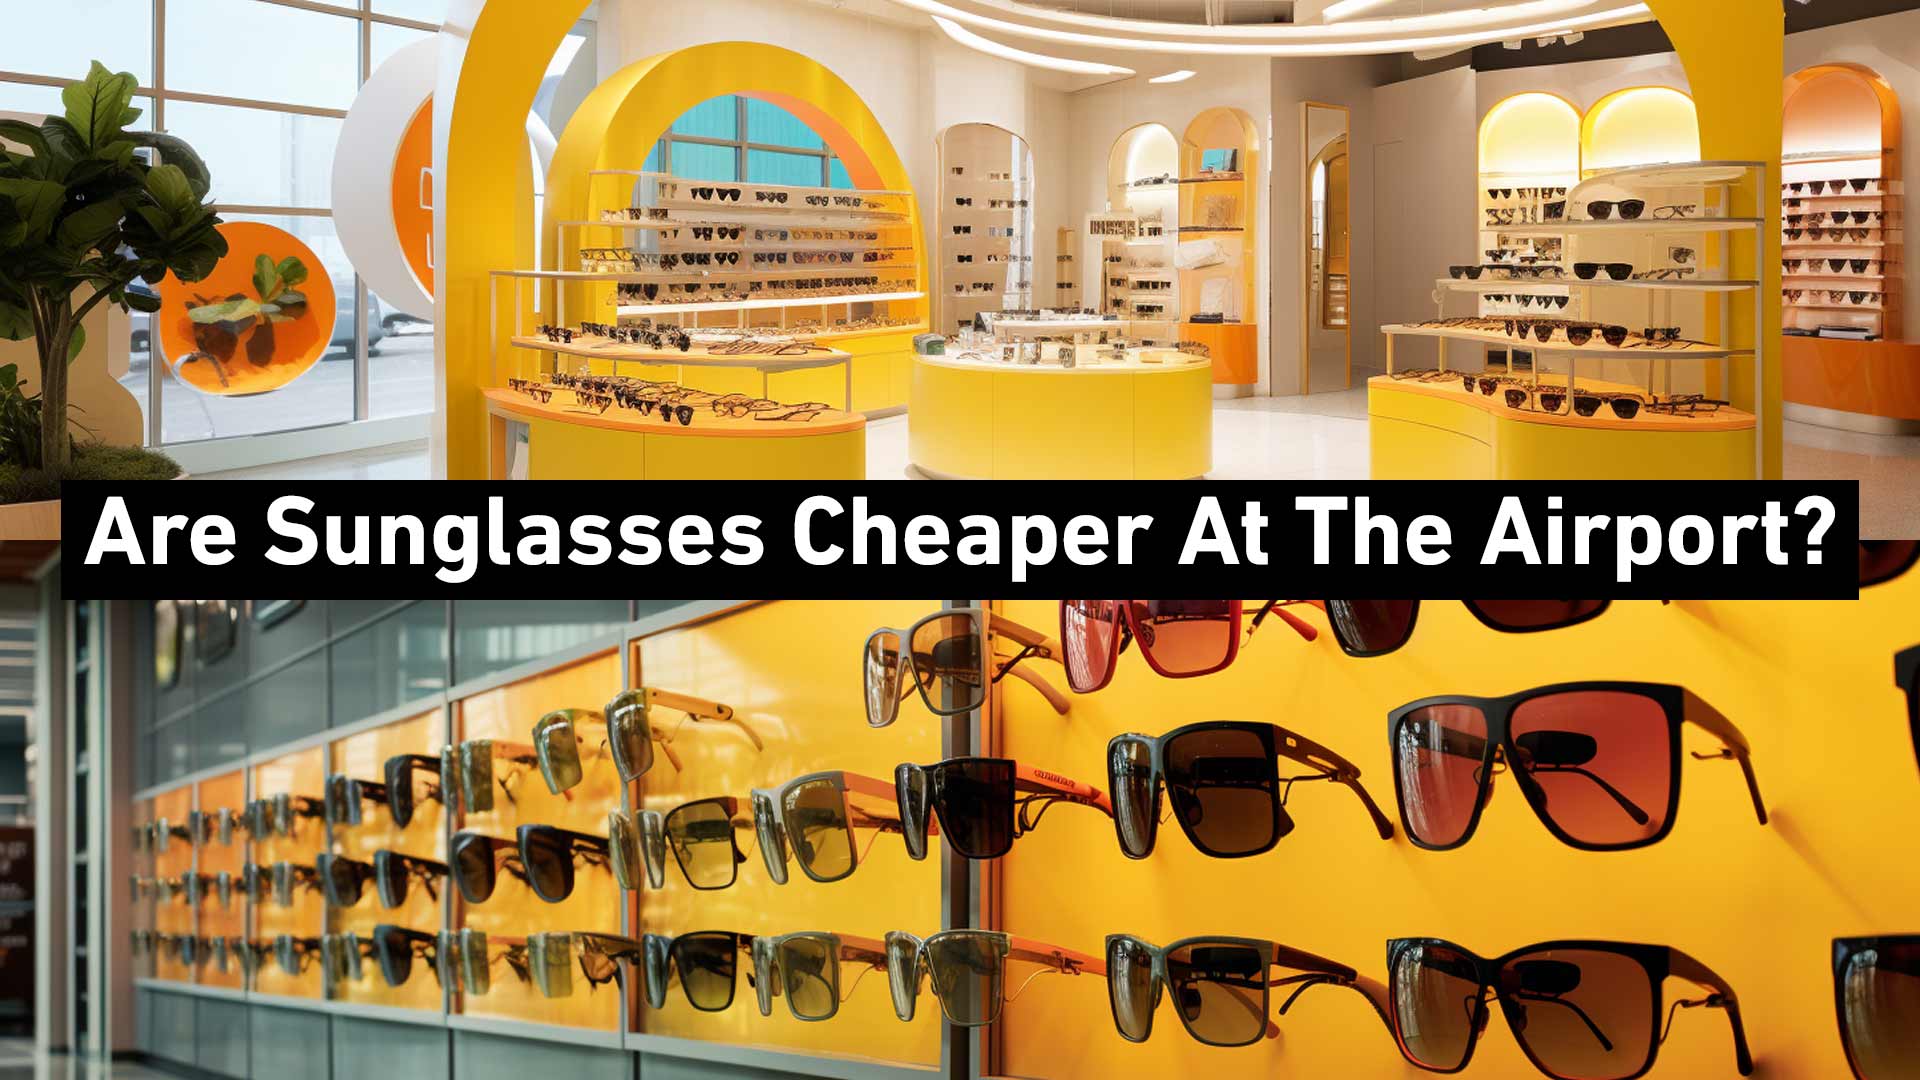 Are Sunglasses Cheaper At The Airport?